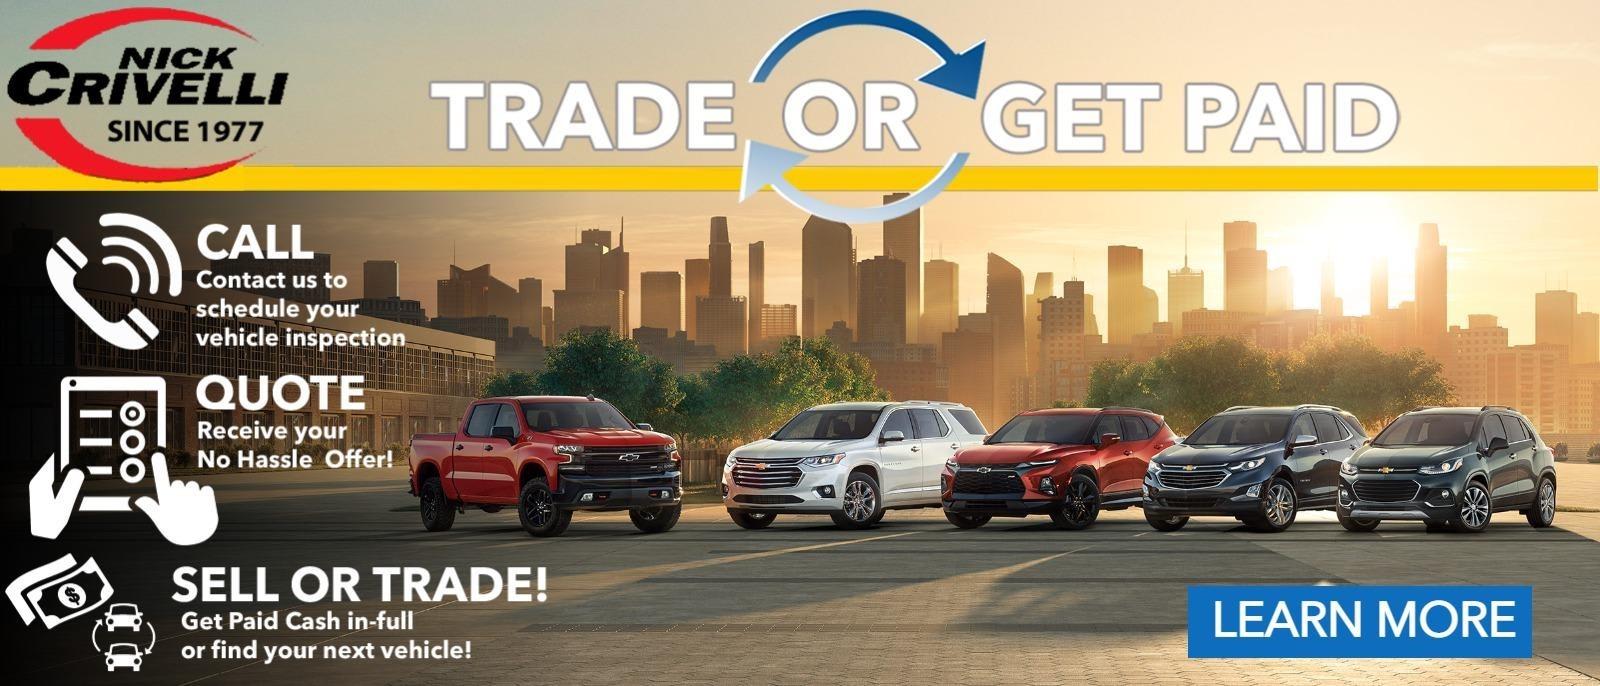 Trade or Get Paid in BEAVER at Nick Crivelli Chevrolet